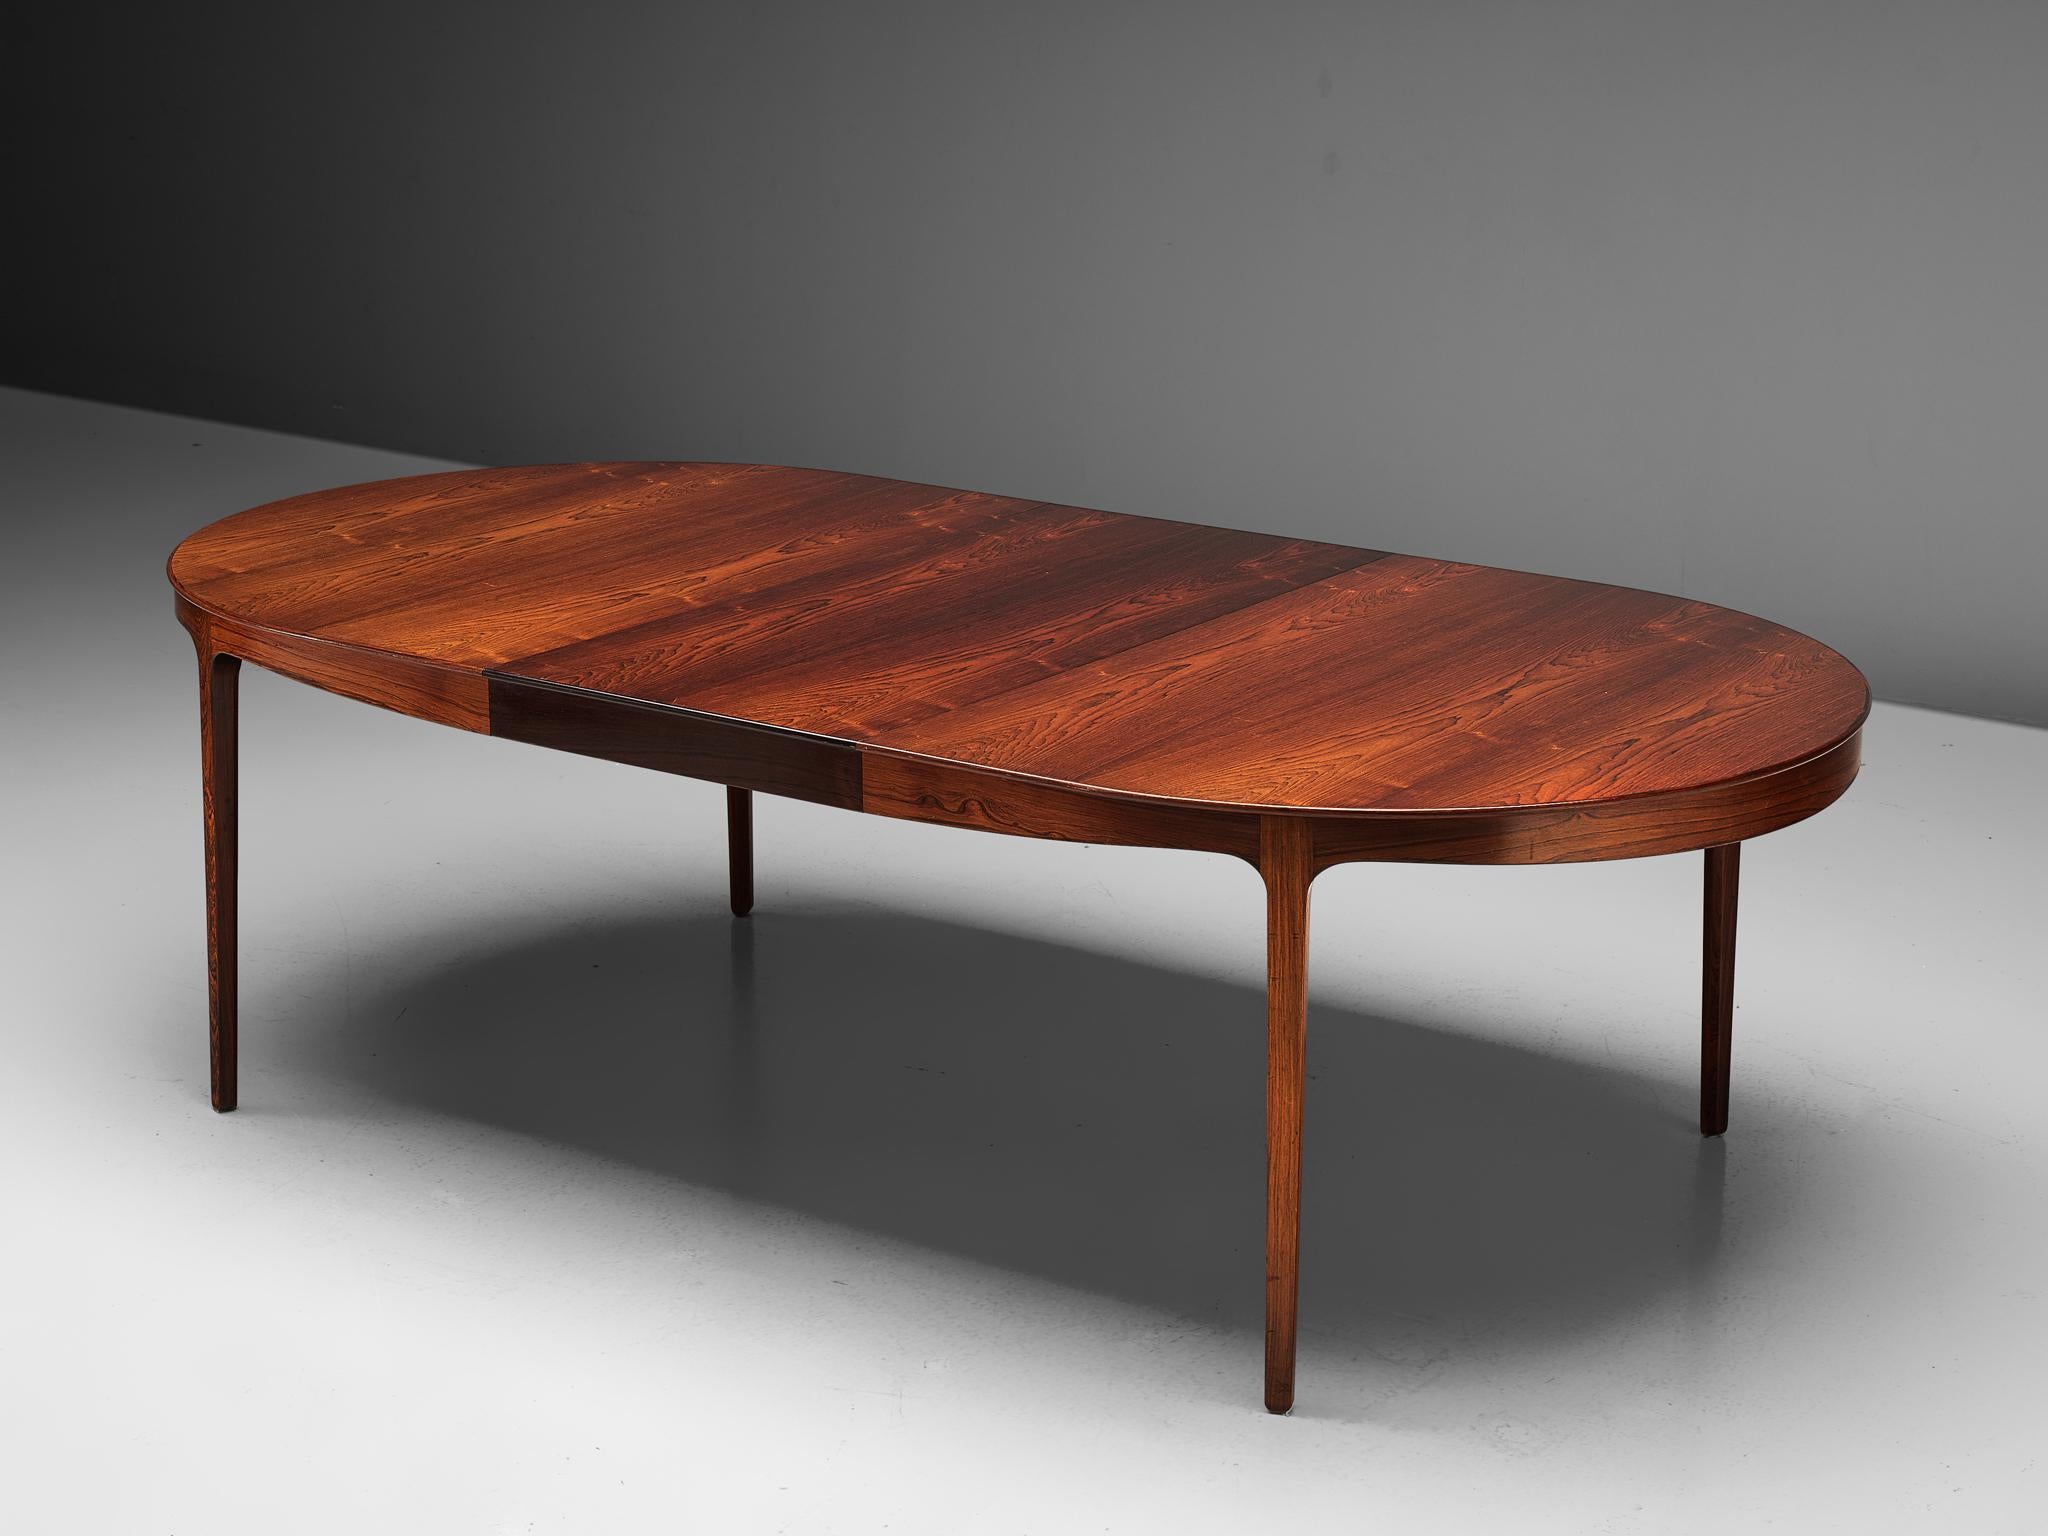 Ole Wanscher for AJ Iversen, dining table, rosewood and, Denmark, 1963.

A luxurious dining table in rosewood. The oval shaped dining table comes with two additional leaves, which makes this a highly versatile piece. The grain is of an exceptional